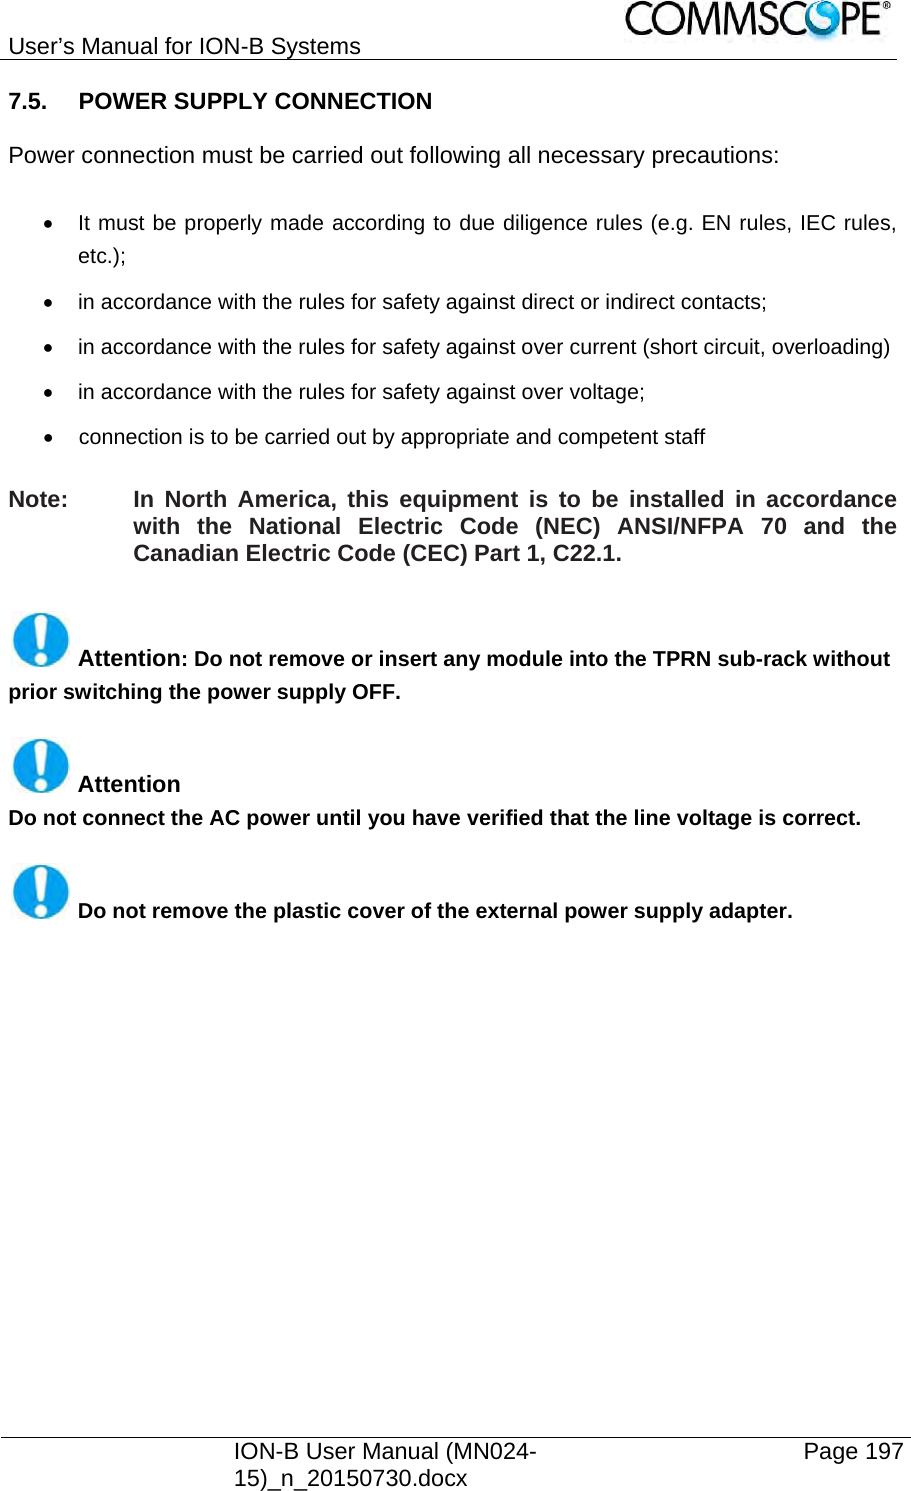 User’s Manual for ION-B Systems    ION-B User Manual (MN024-15)_n_20150730.docx  Page 197 7.5. POWER SUPPLY CONNECTION  Power connection must be carried out following all necessary precautions:    It must be properly made according to due diligence rules (e.g. EN rules, IEC rules, etc.);   in accordance with the rules for safety against direct or indirect contacts;   in accordance with the rules for safety against over current (short circuit, overloading)   in accordance with the rules for safety against over voltage;   connection is to be carried out by appropriate and competent staff  Note:  In North America, this equipment is to be installed in accordance with the National Electric Code (NEC) ANSI/NFPA 70 and the Canadian Electric Code (CEC) Part 1, C22.1.   Attention: Do not remove or insert any module into the TPRN sub-rack without prior switching the power supply OFF.   Attention Do not connect the AC power until you have verified that the line voltage is correct.   Do not remove the plastic cover of the external power supply adapter.  